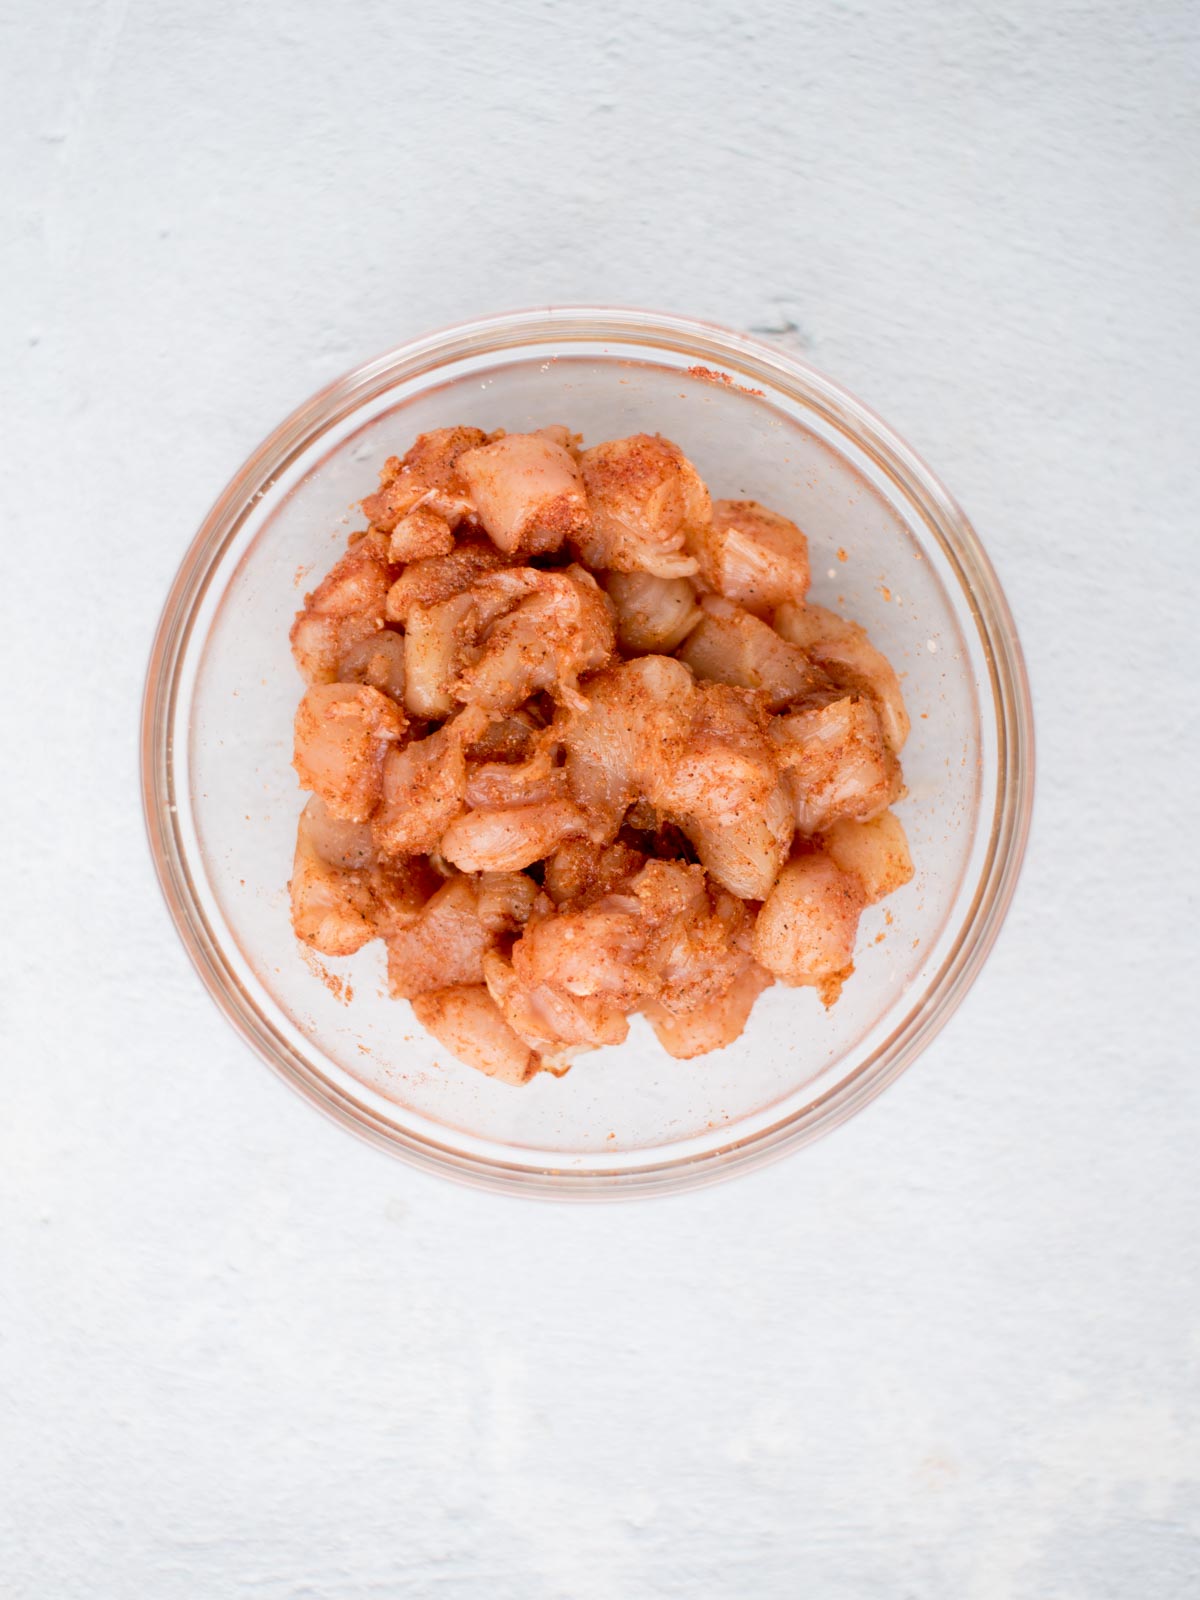 Seasoned raw diced chicken pieces in a mixing bowl.